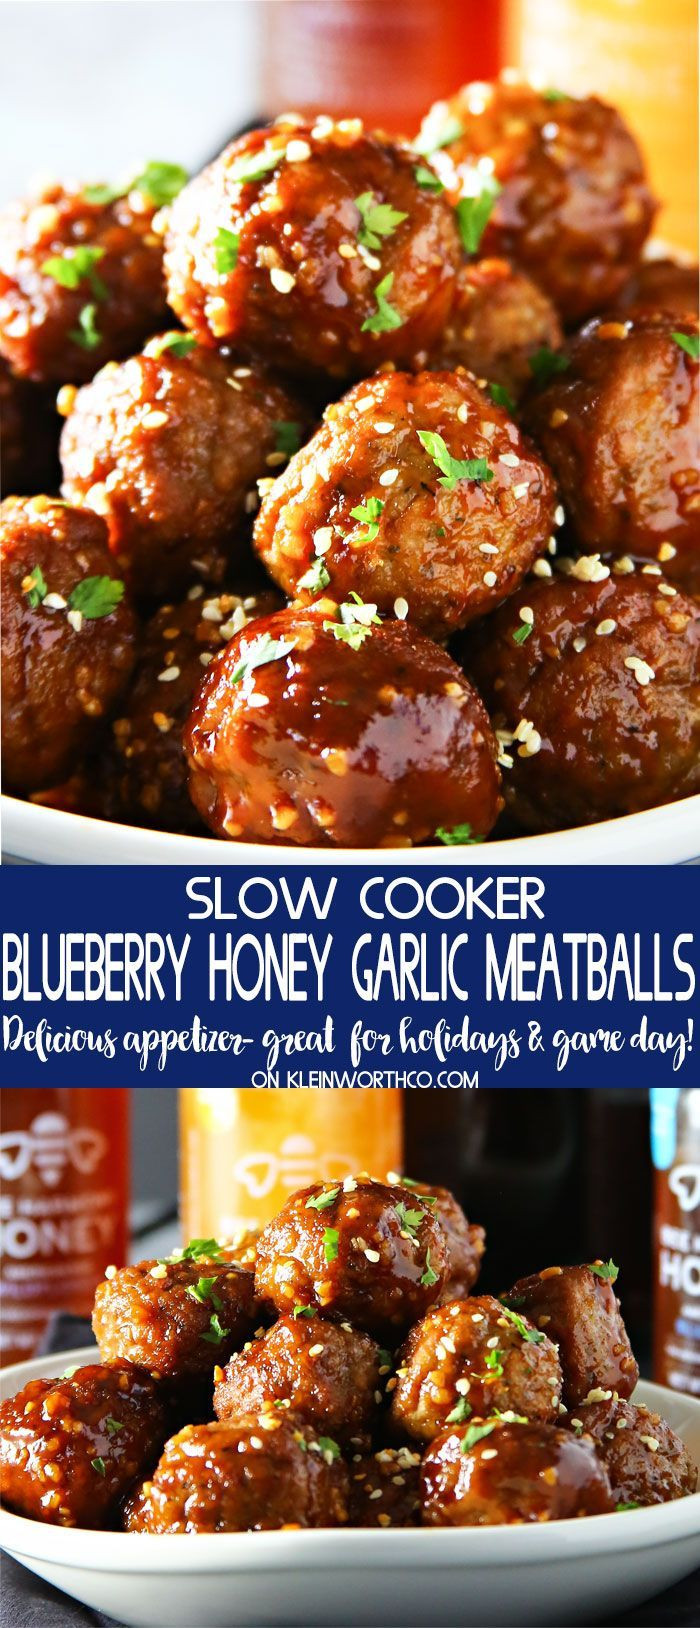 Slow Cooker Appetizers For Party
 Slow Cooker Blueberry Honey Garlic Meatballs are an easy